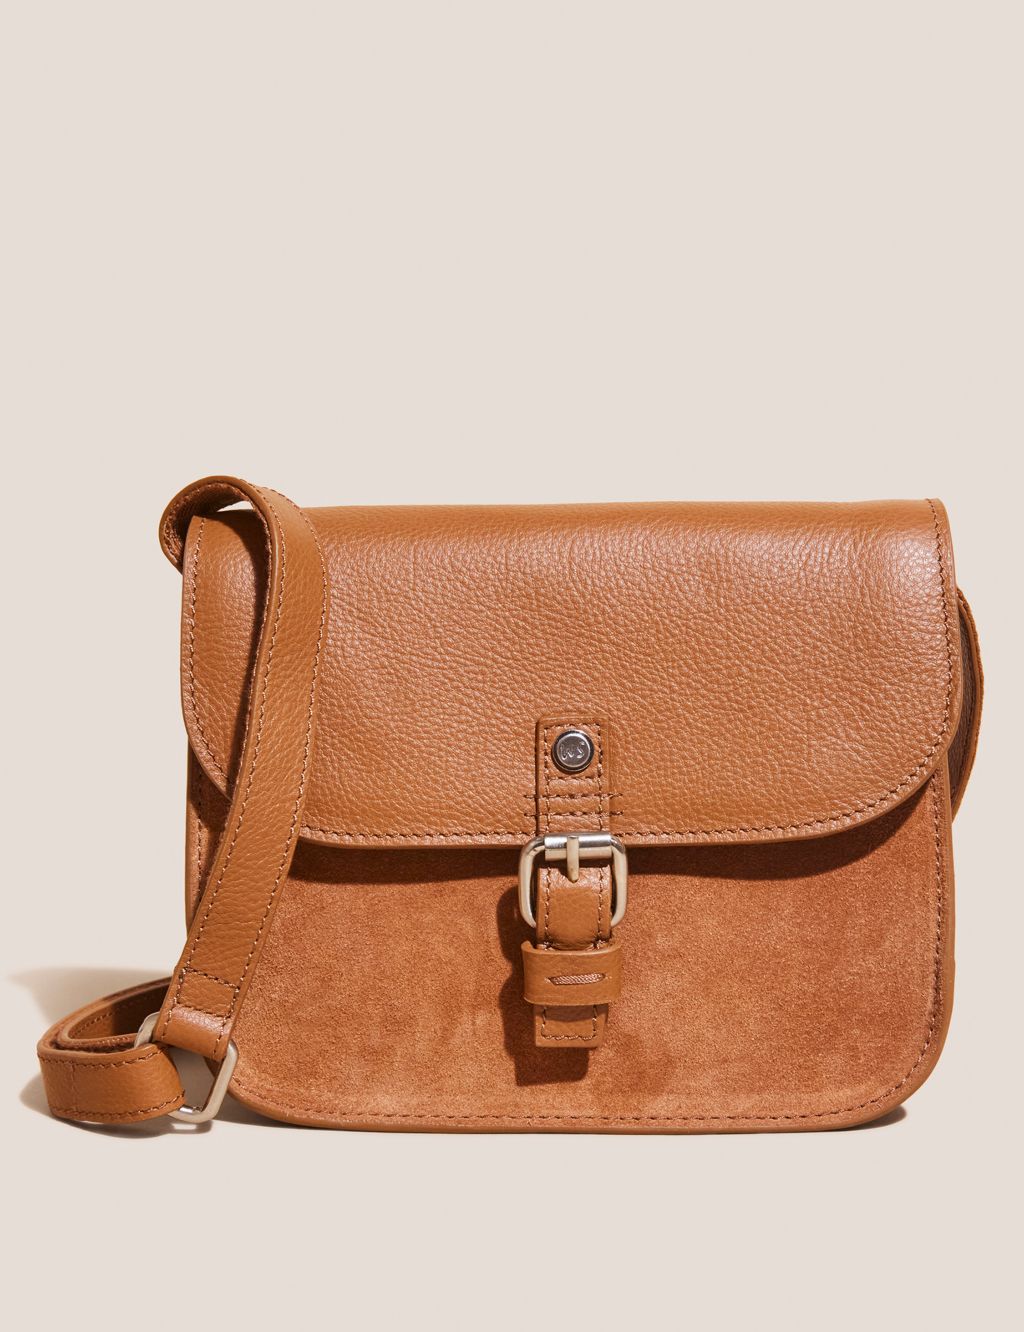 Leather Buckle Detail Cross Body Bag image 1